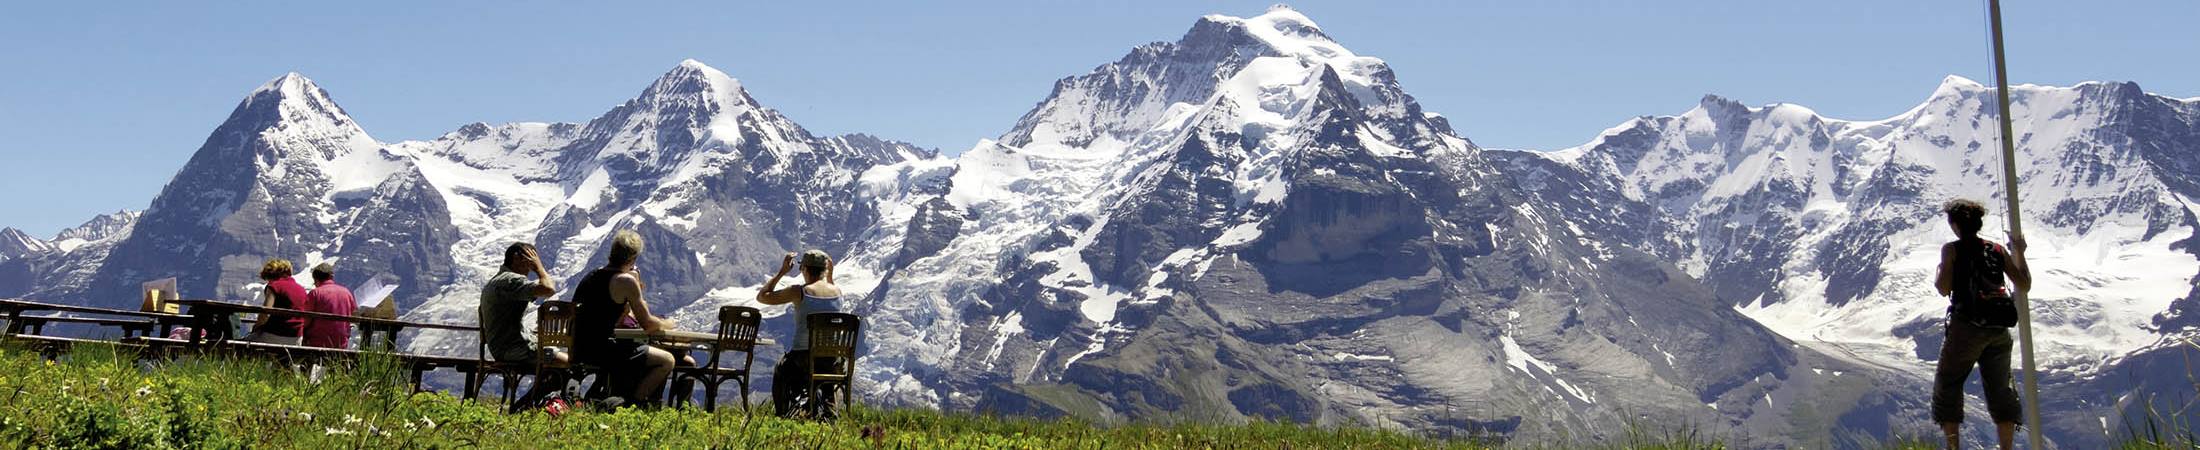 Your holiday region, the Bernese Oberland, Jungfrau region, mountains, lakes, unspoiled nature